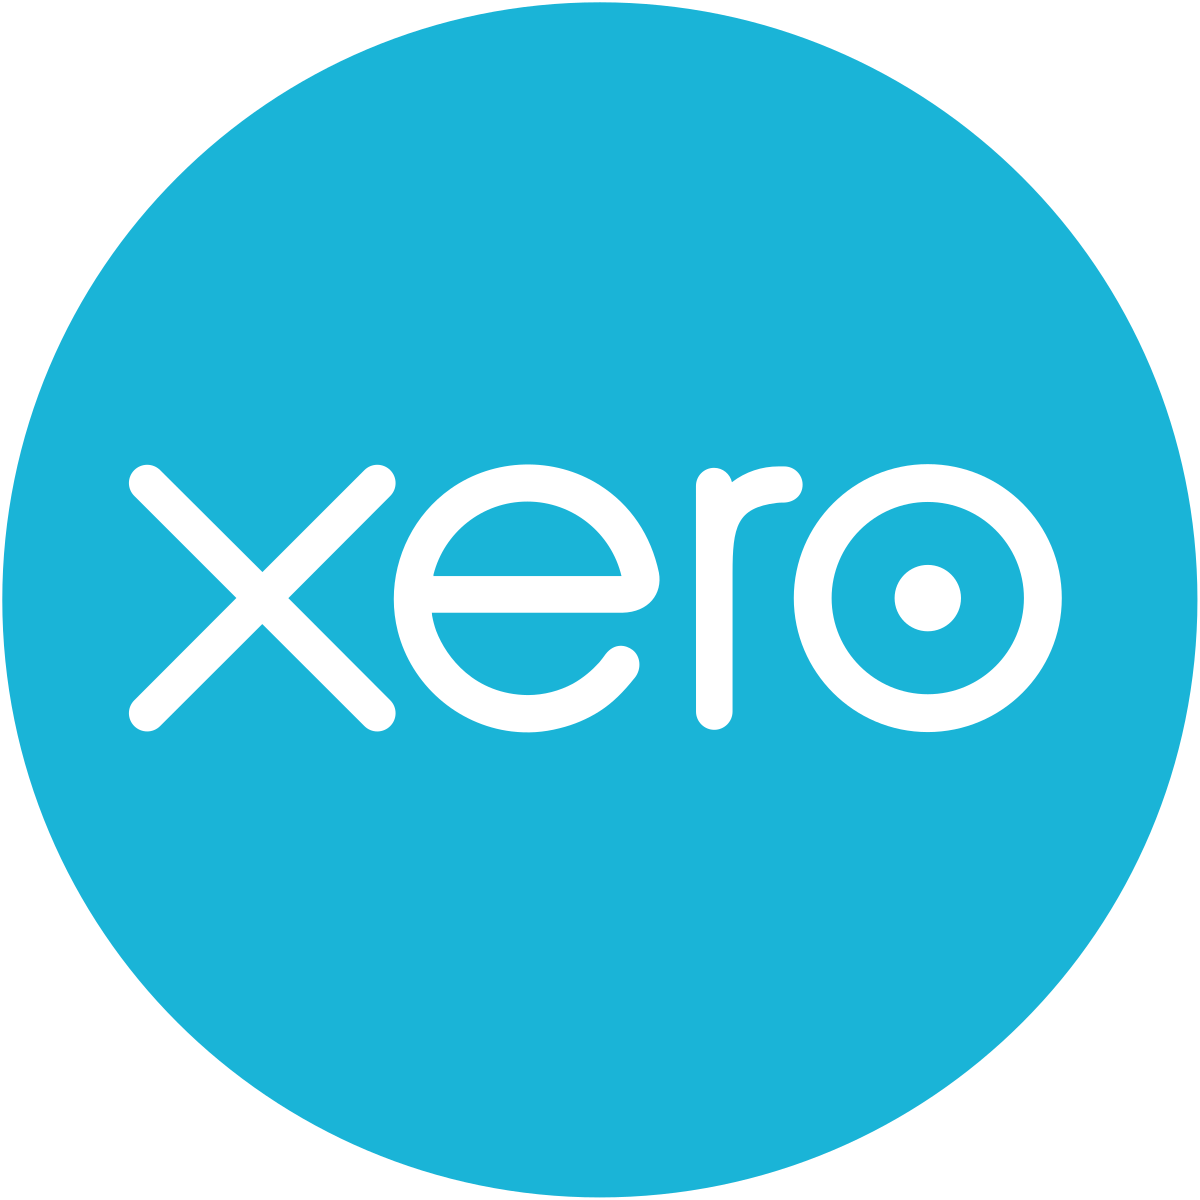 5 Xero Mistakes Business Owners Make and How To Avoid Them